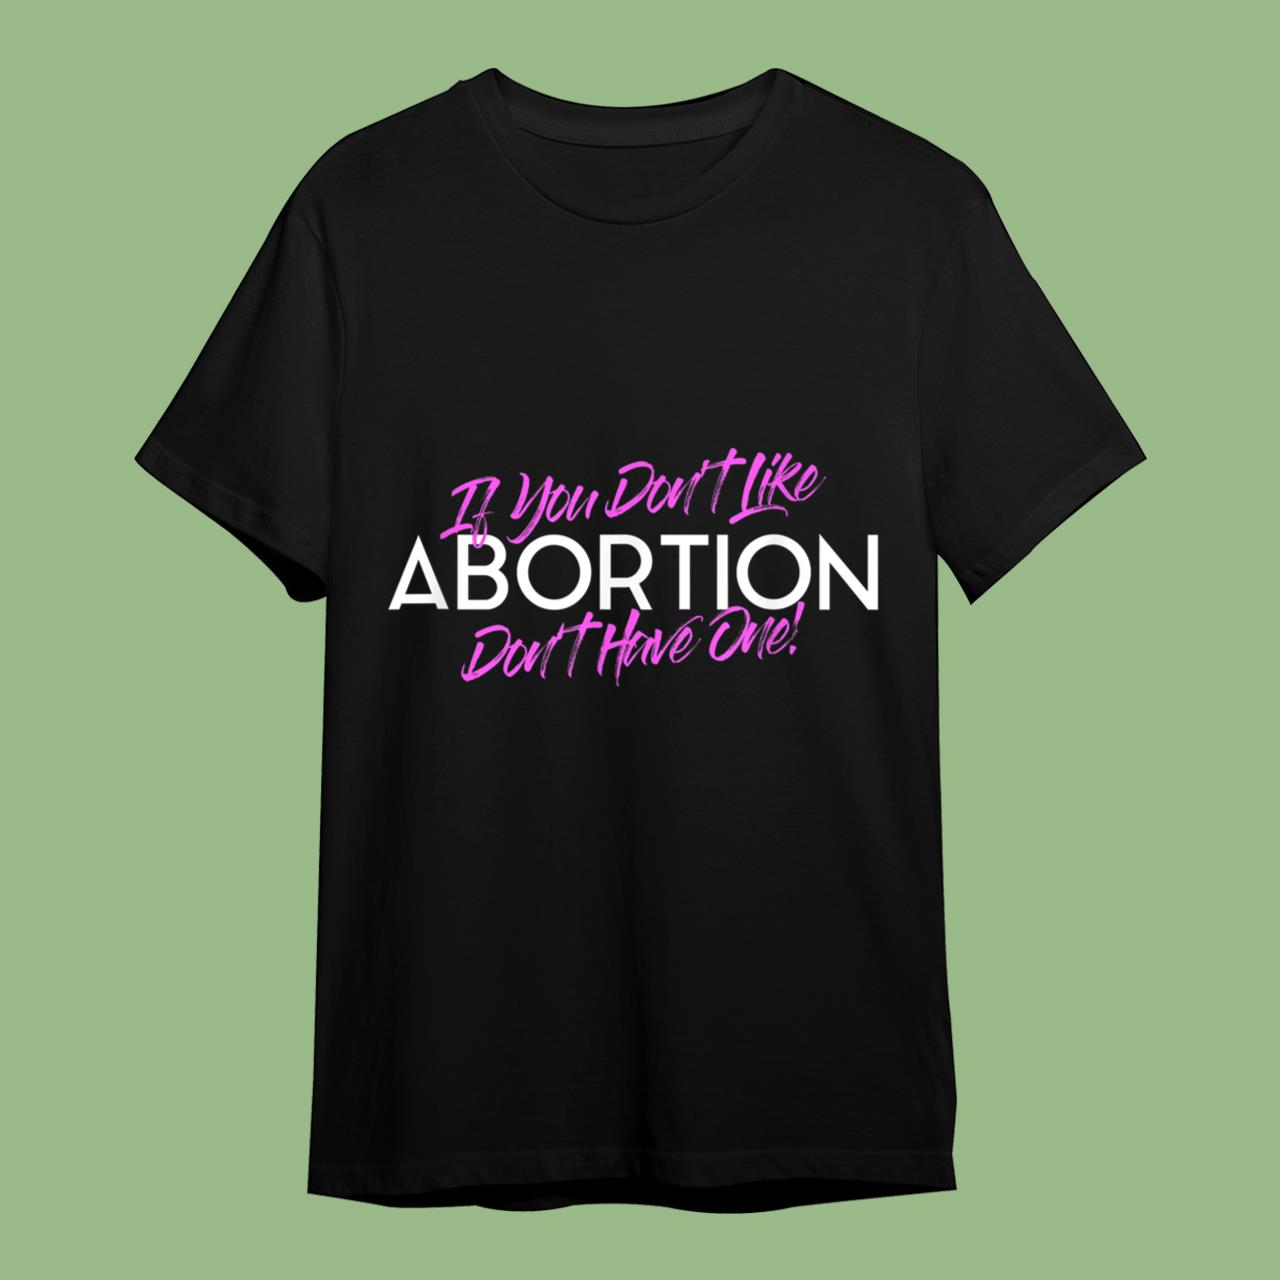 If You Don't Like Abortion Don't Have One - Pro Choice T-Shirt